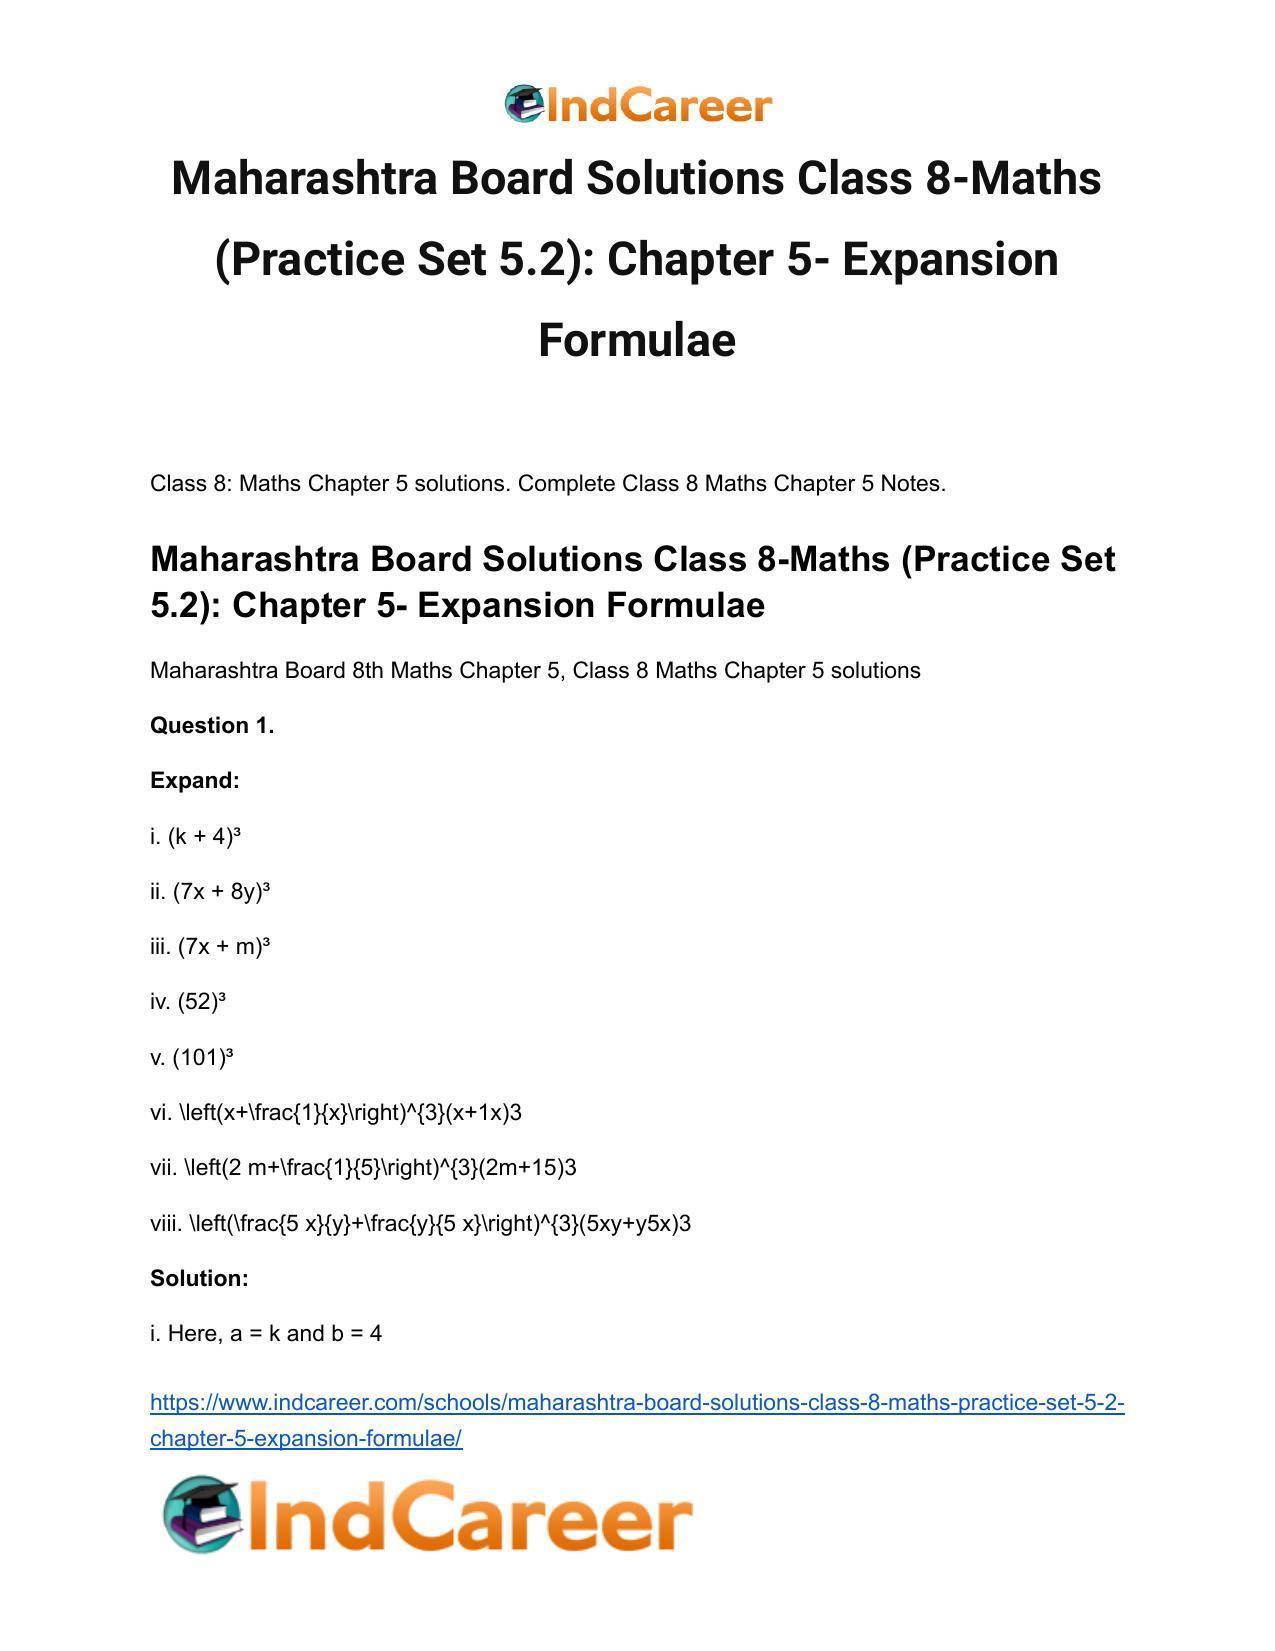 Maharashtra Board Solutions Class 8-Maths (Practice Set 5.2): Chapter 5- Expansion Formulae - Page 2